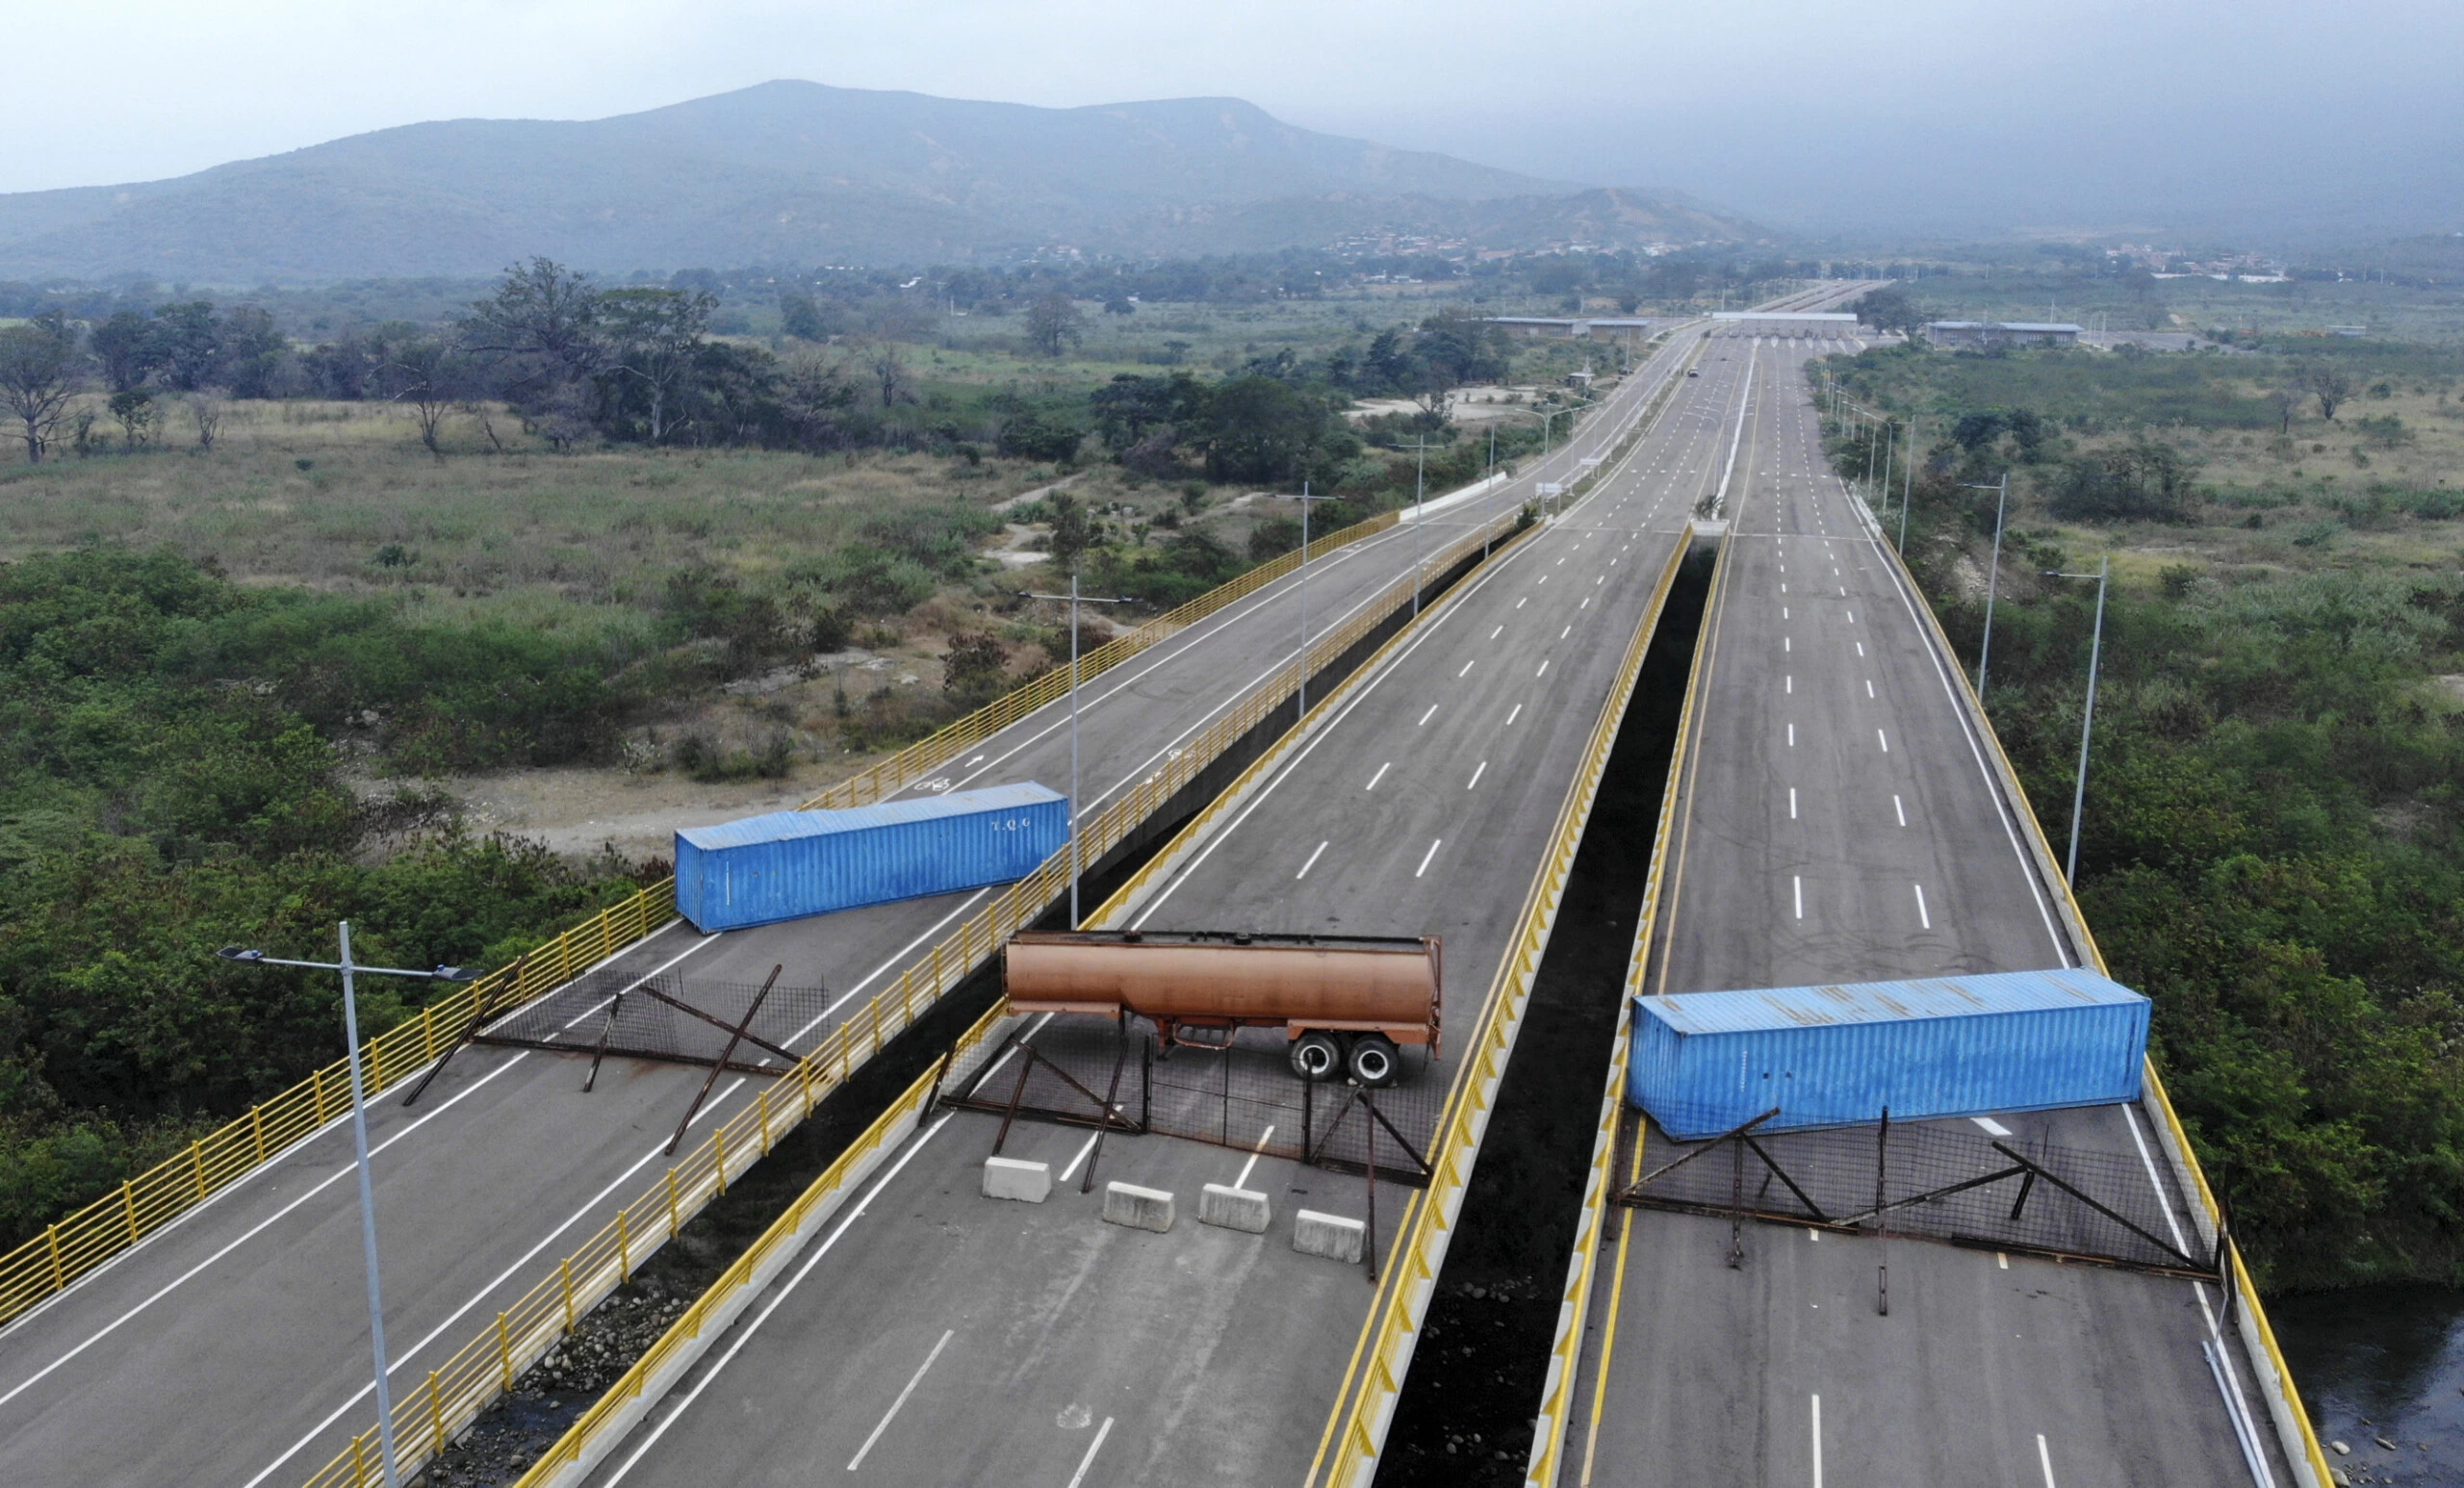 Aerial view of the Tienditas Bridge, in the border between Cucuta, Colombia and Tachira, Venezuela, after Venezuelan military forces blocked it with containers on February 6, 2019. - Venezuelan military officers blocked a bridge on the border with Colombia ahead of an anticipated humanitarian aid shipment, as opposition leader Juan Guaido stepped up his challenge to President Nicolas Maduro's authority. (Photo by EDINSON ESTUPINAN / AFP)        (Photo credit should read EDINSON ESTUPINAN/AFP/Getty Images)